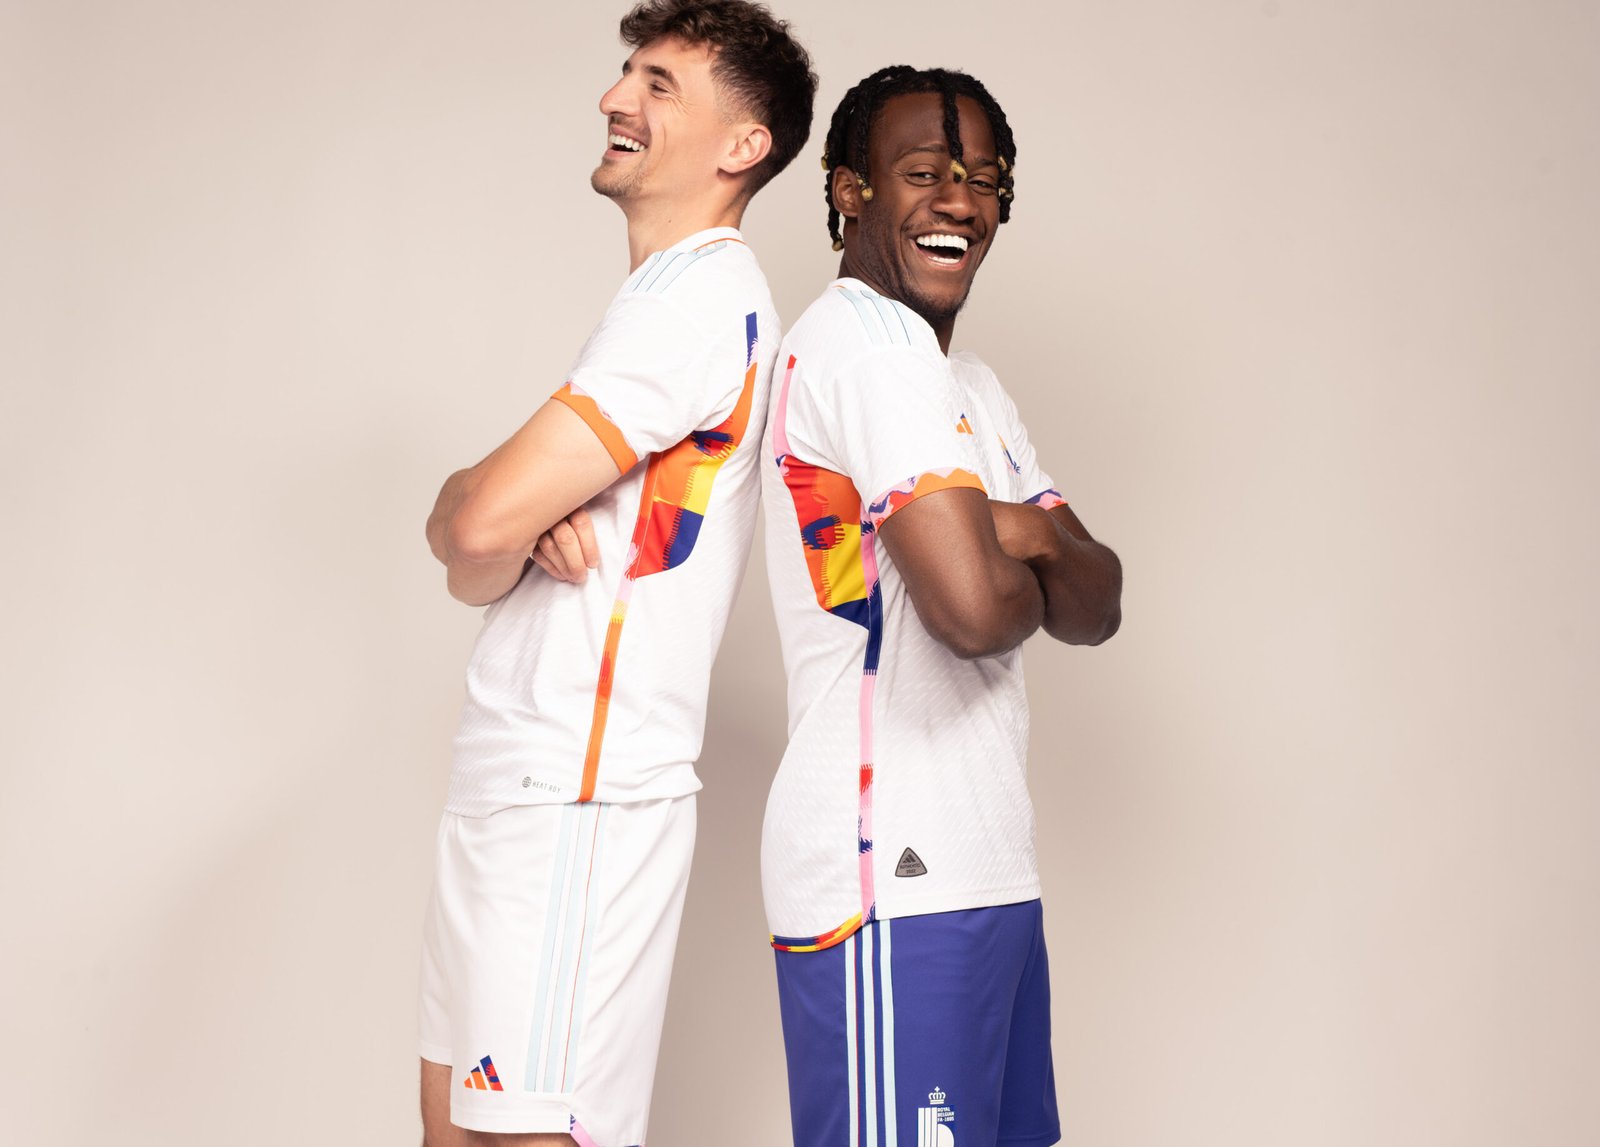 Belgian Red Devils make statement of LOVE with FIFA World Cup 2022TM away kit